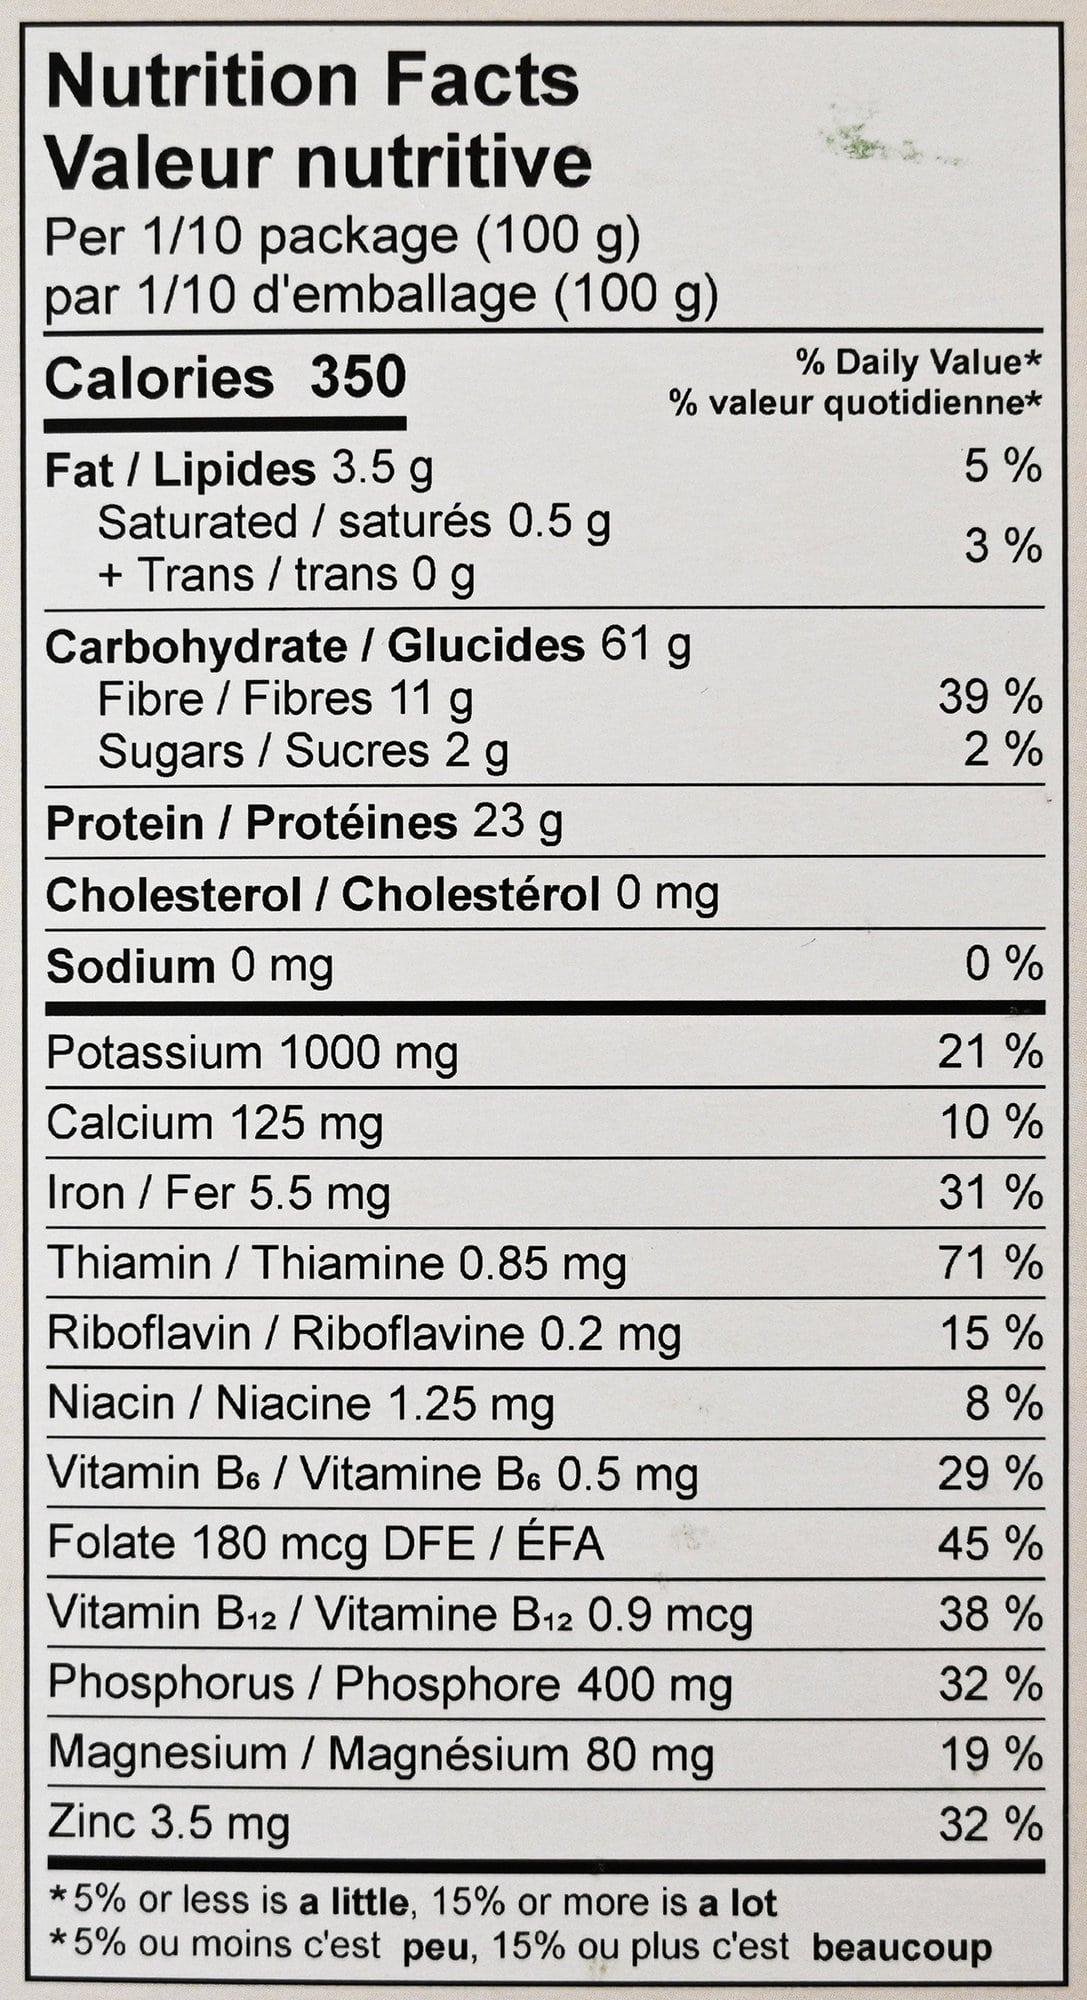 Image of the nutrition facts for the pasta from the back of the box.